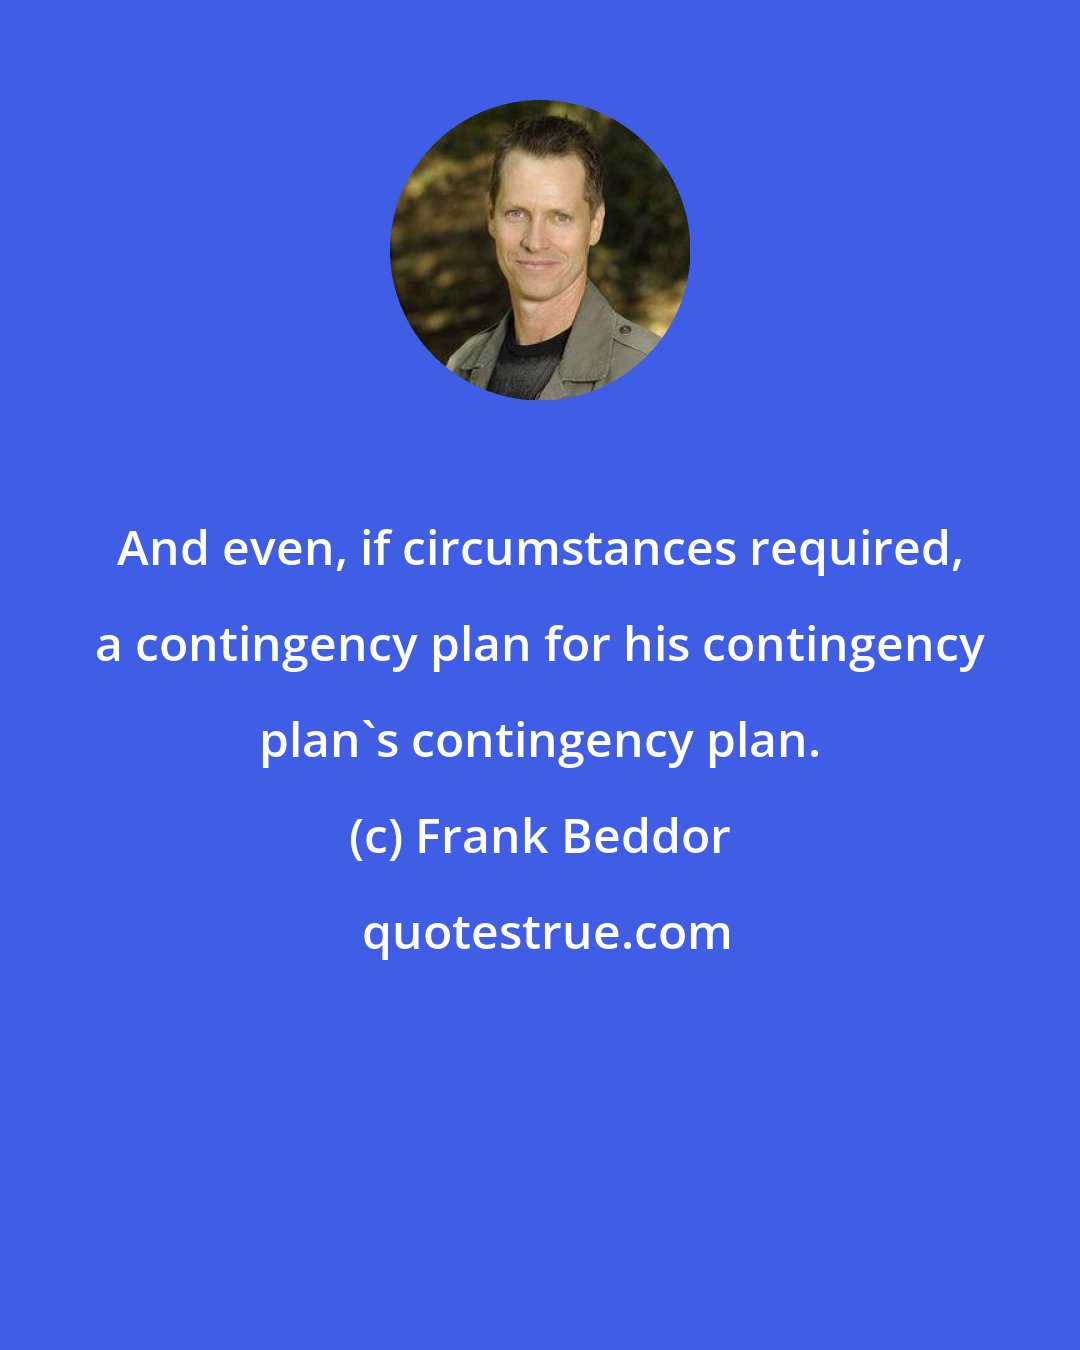 Frank Beddor: And even, if circumstances required, a contingency plan for his contingency plan's contingency plan.